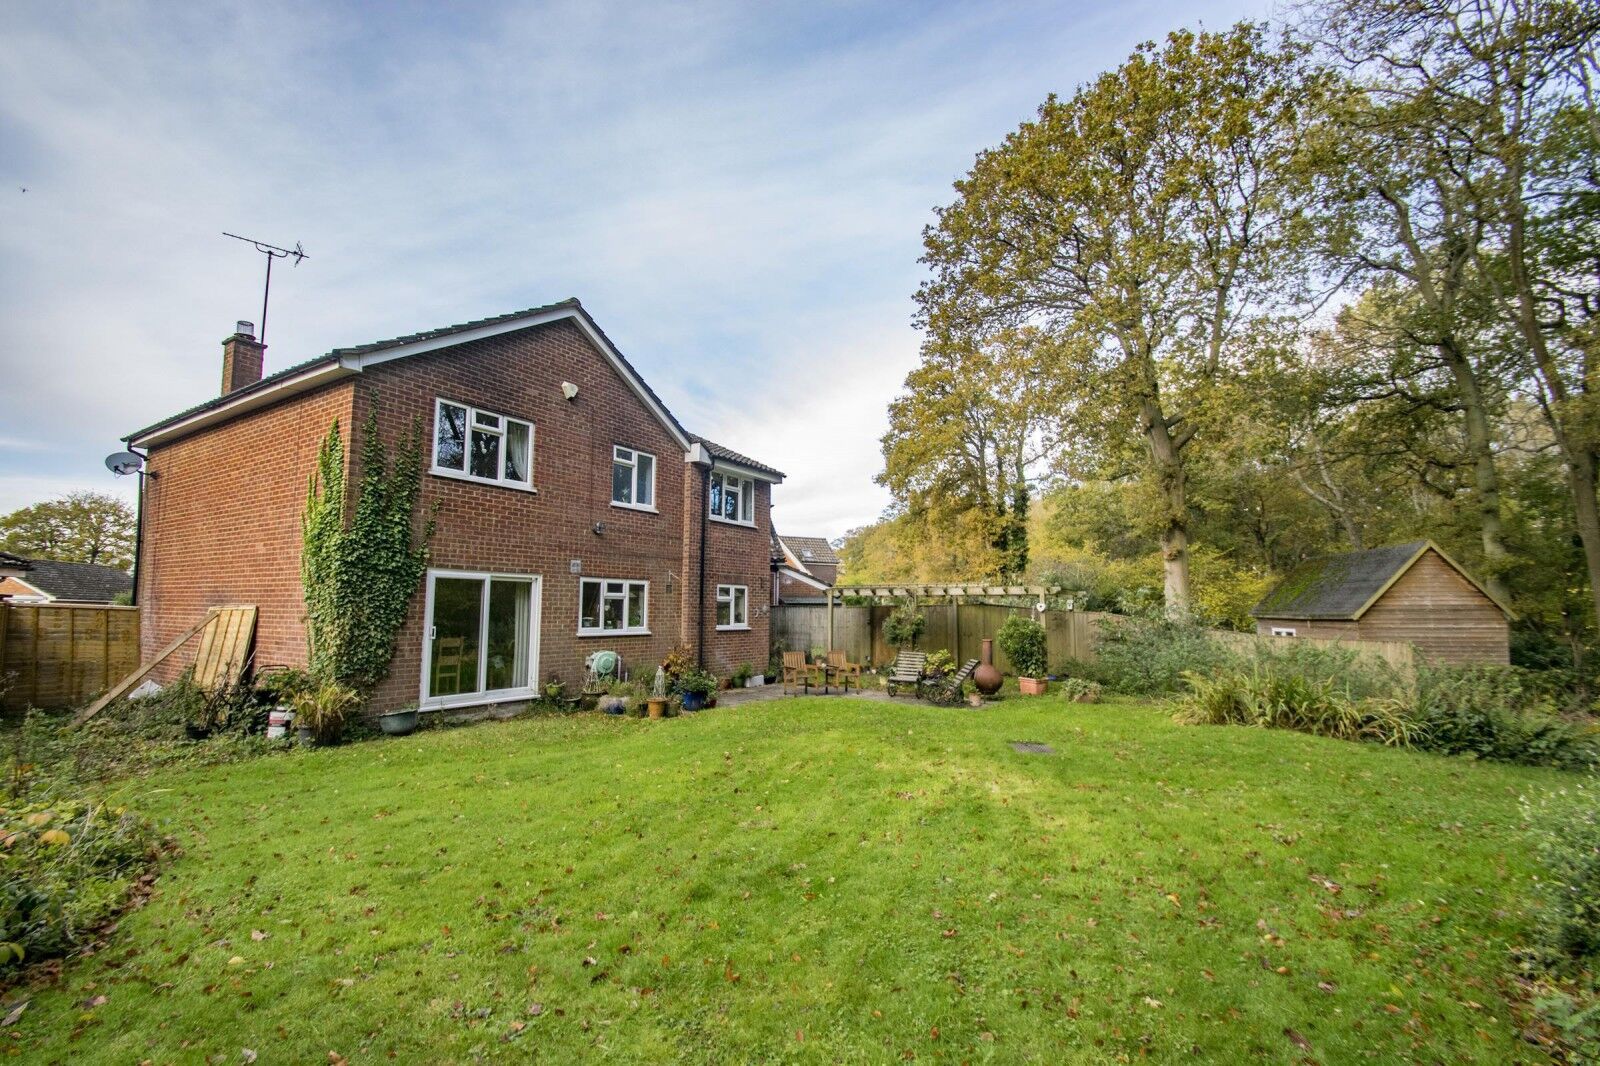 4 bedroom detached house for sale Beechwood Close, Crays Pond, RG8, main image